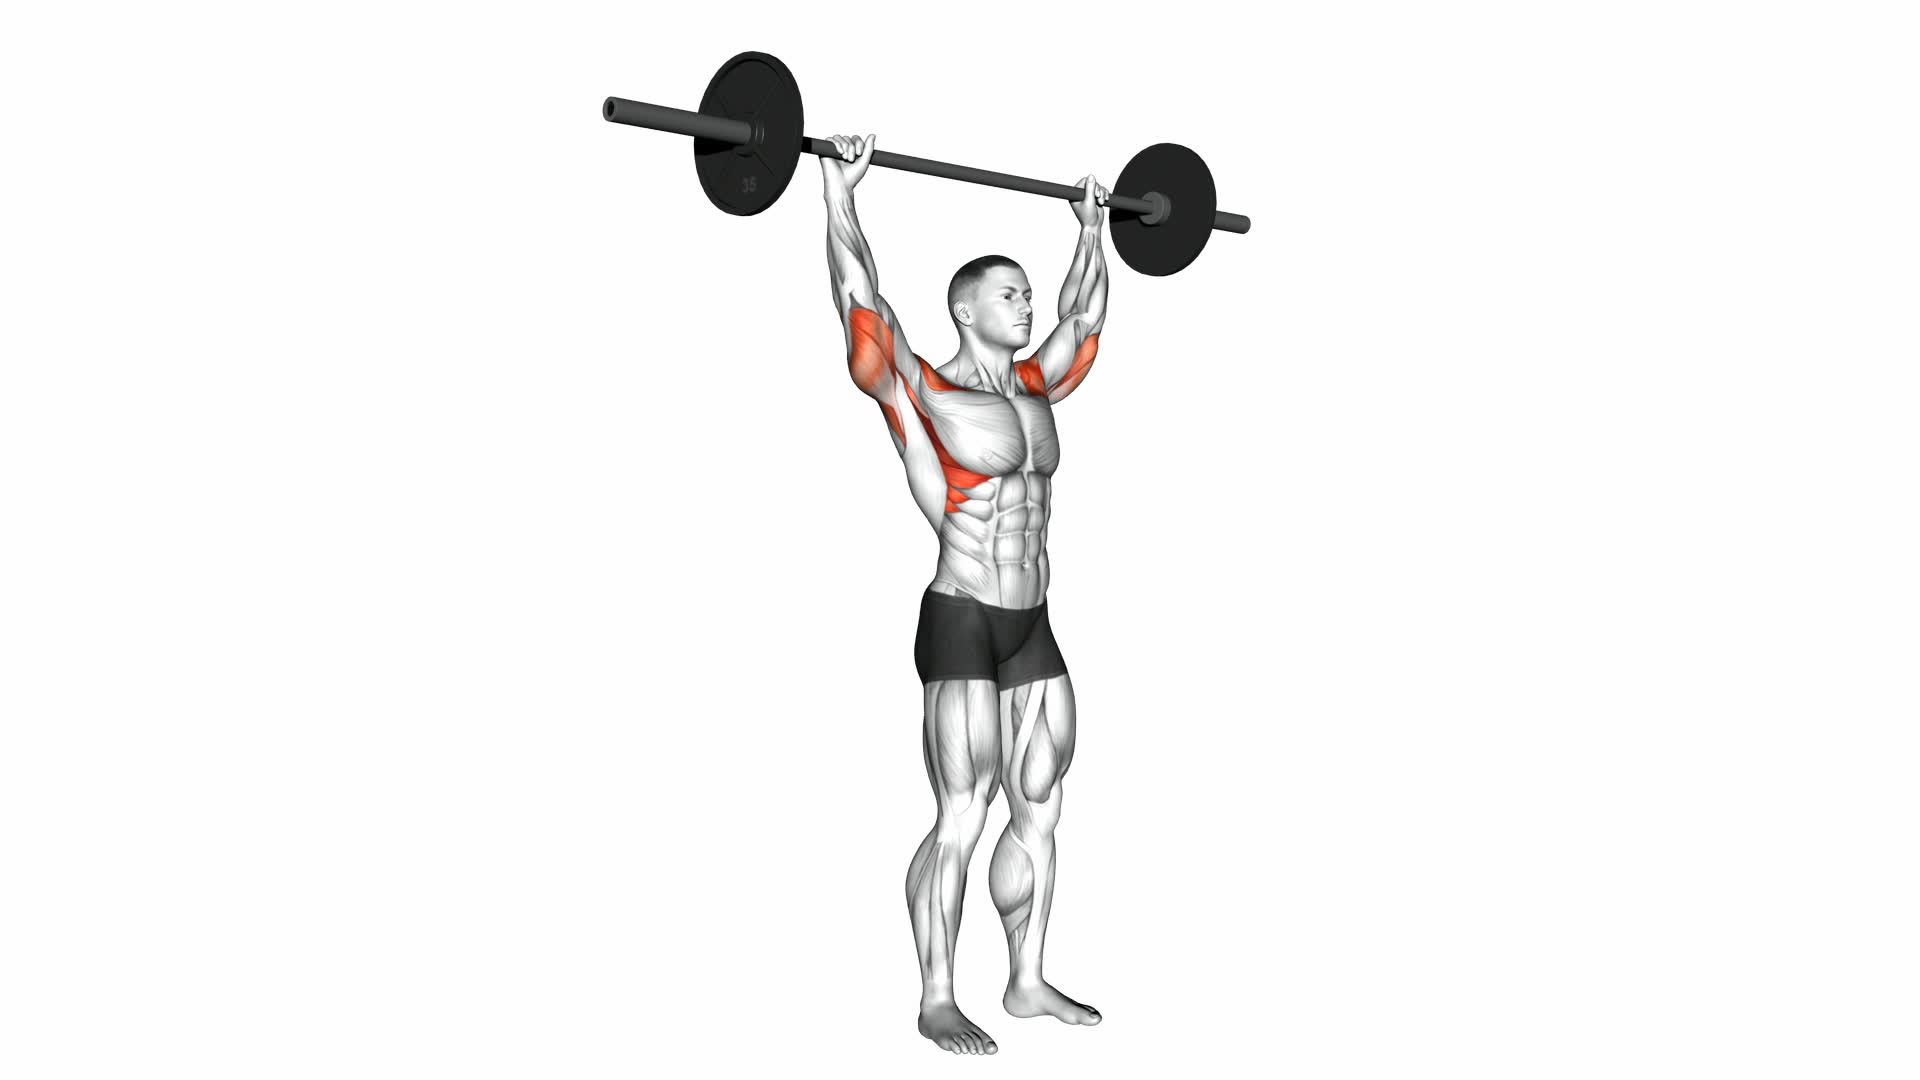 Standing Behind Neck Press - Video Exercise Guide & Tips